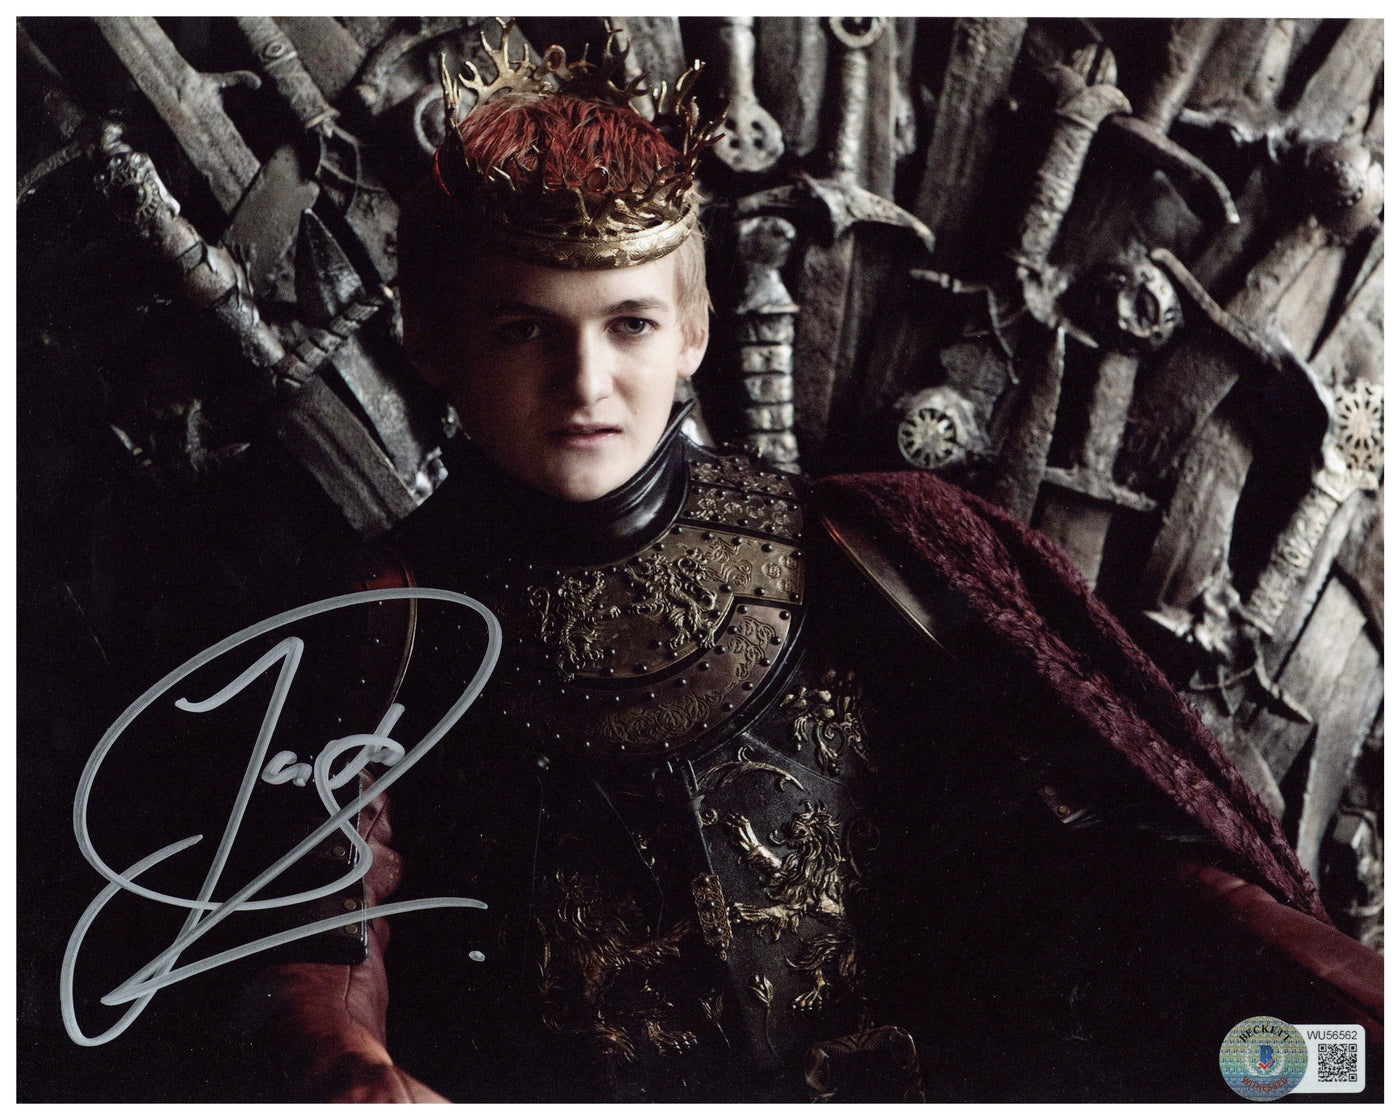 JACK GLEESON SIGNED 8X10 PHOTO GAME OF THRONES JOFFREY AUTOGRAPHED BAS 2